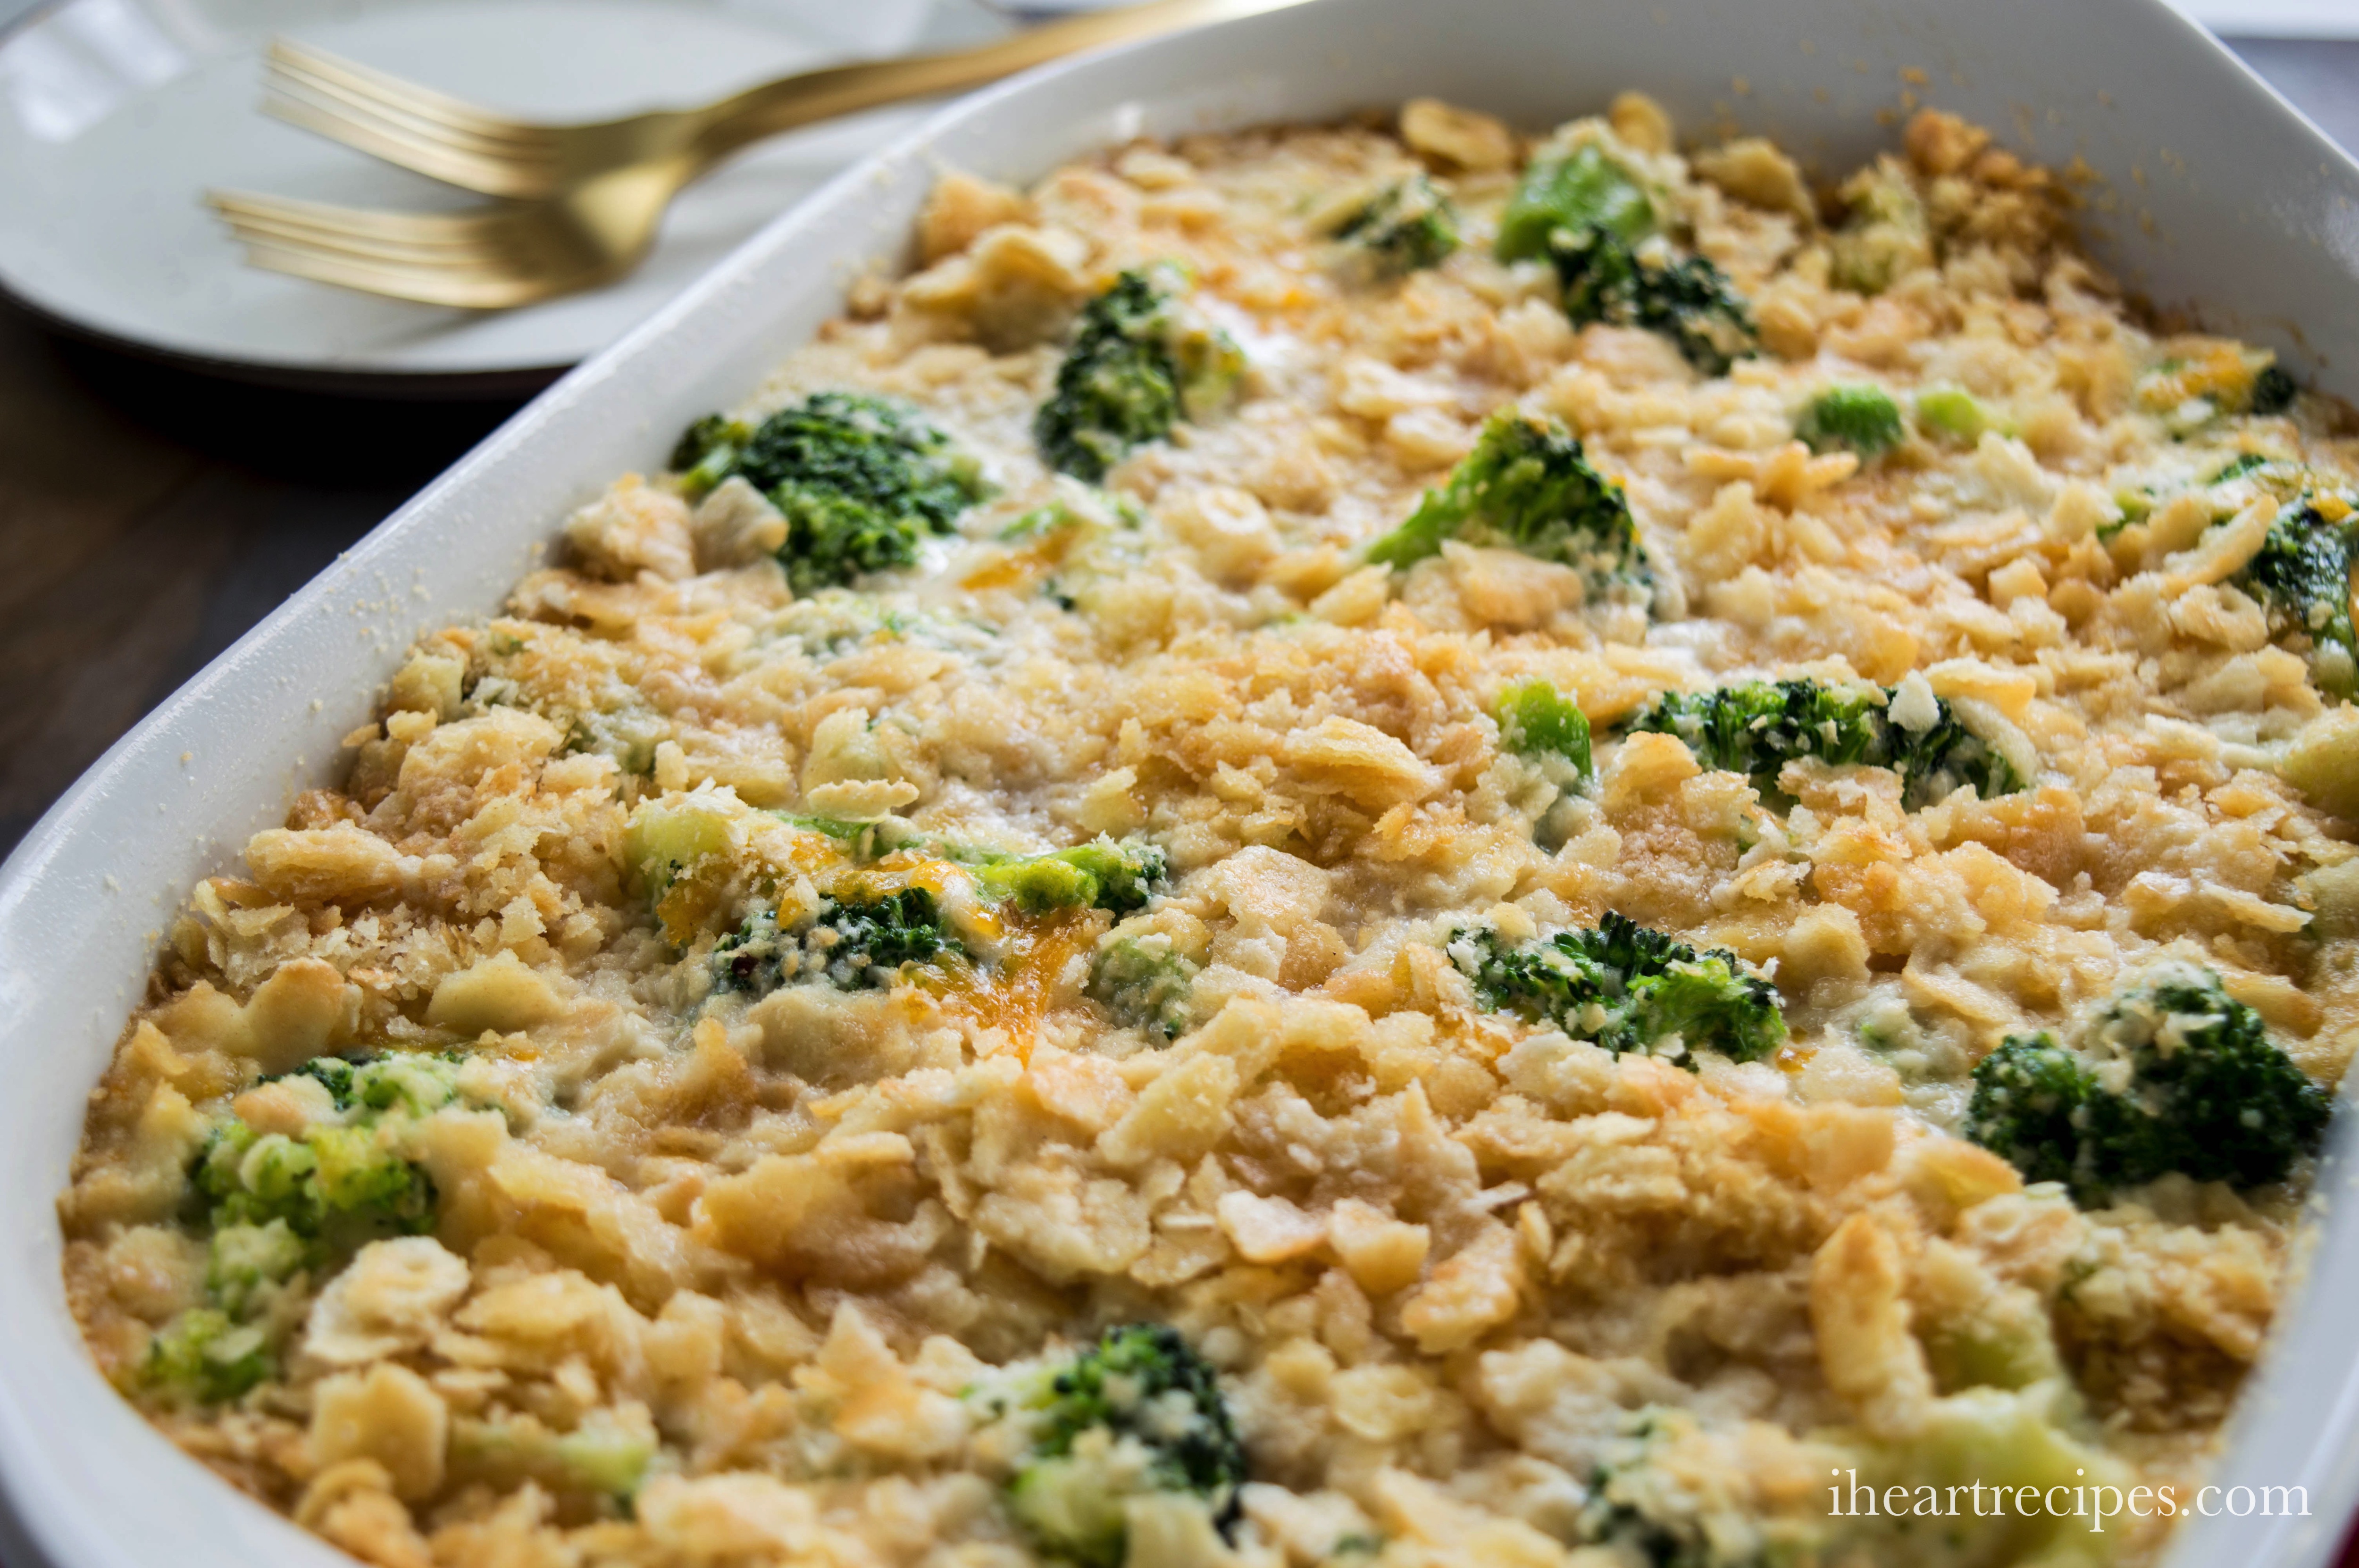 Creamy southern broccoli casserole topped with a crunchy layer served in a white serving dish. The perfect comfort food!